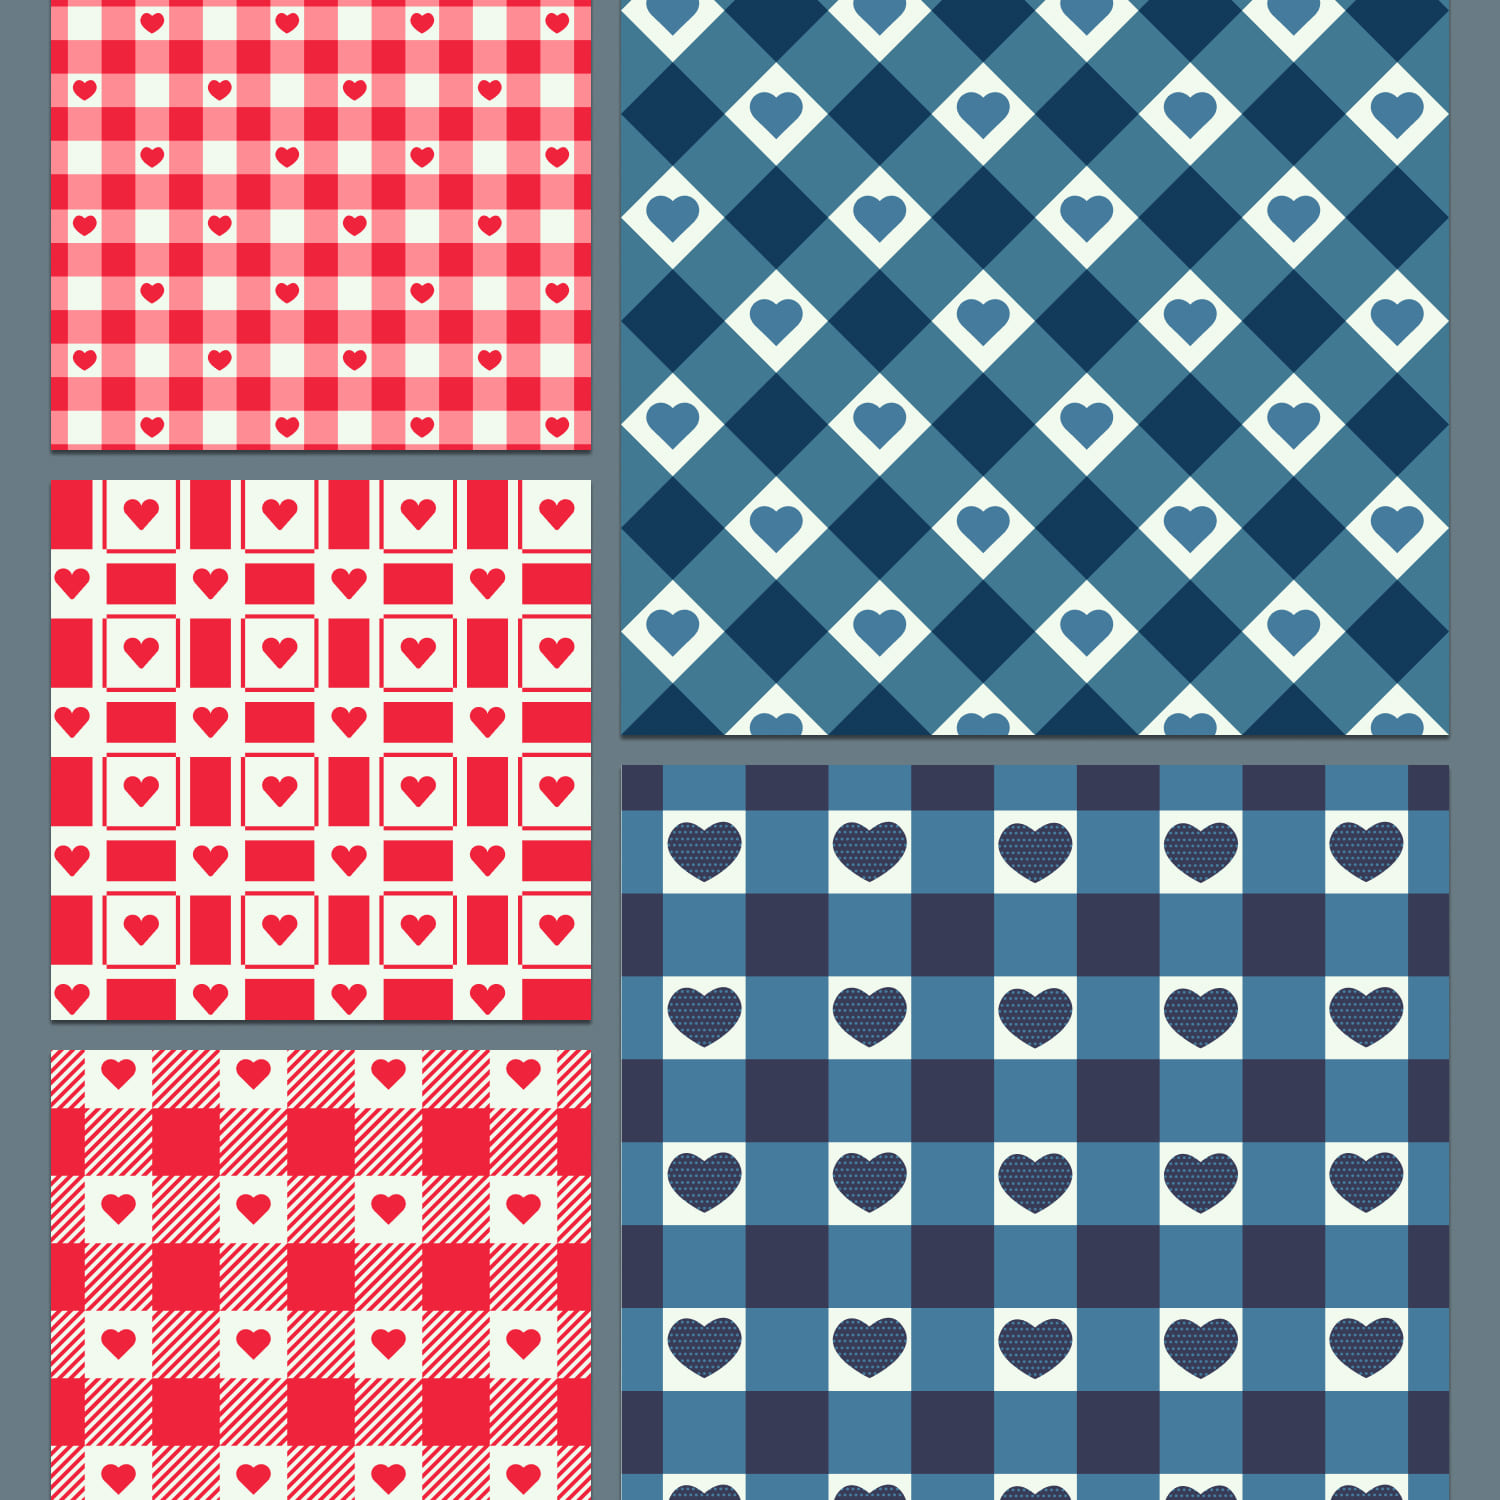 Pink & Grey Gingham Patterns cover.